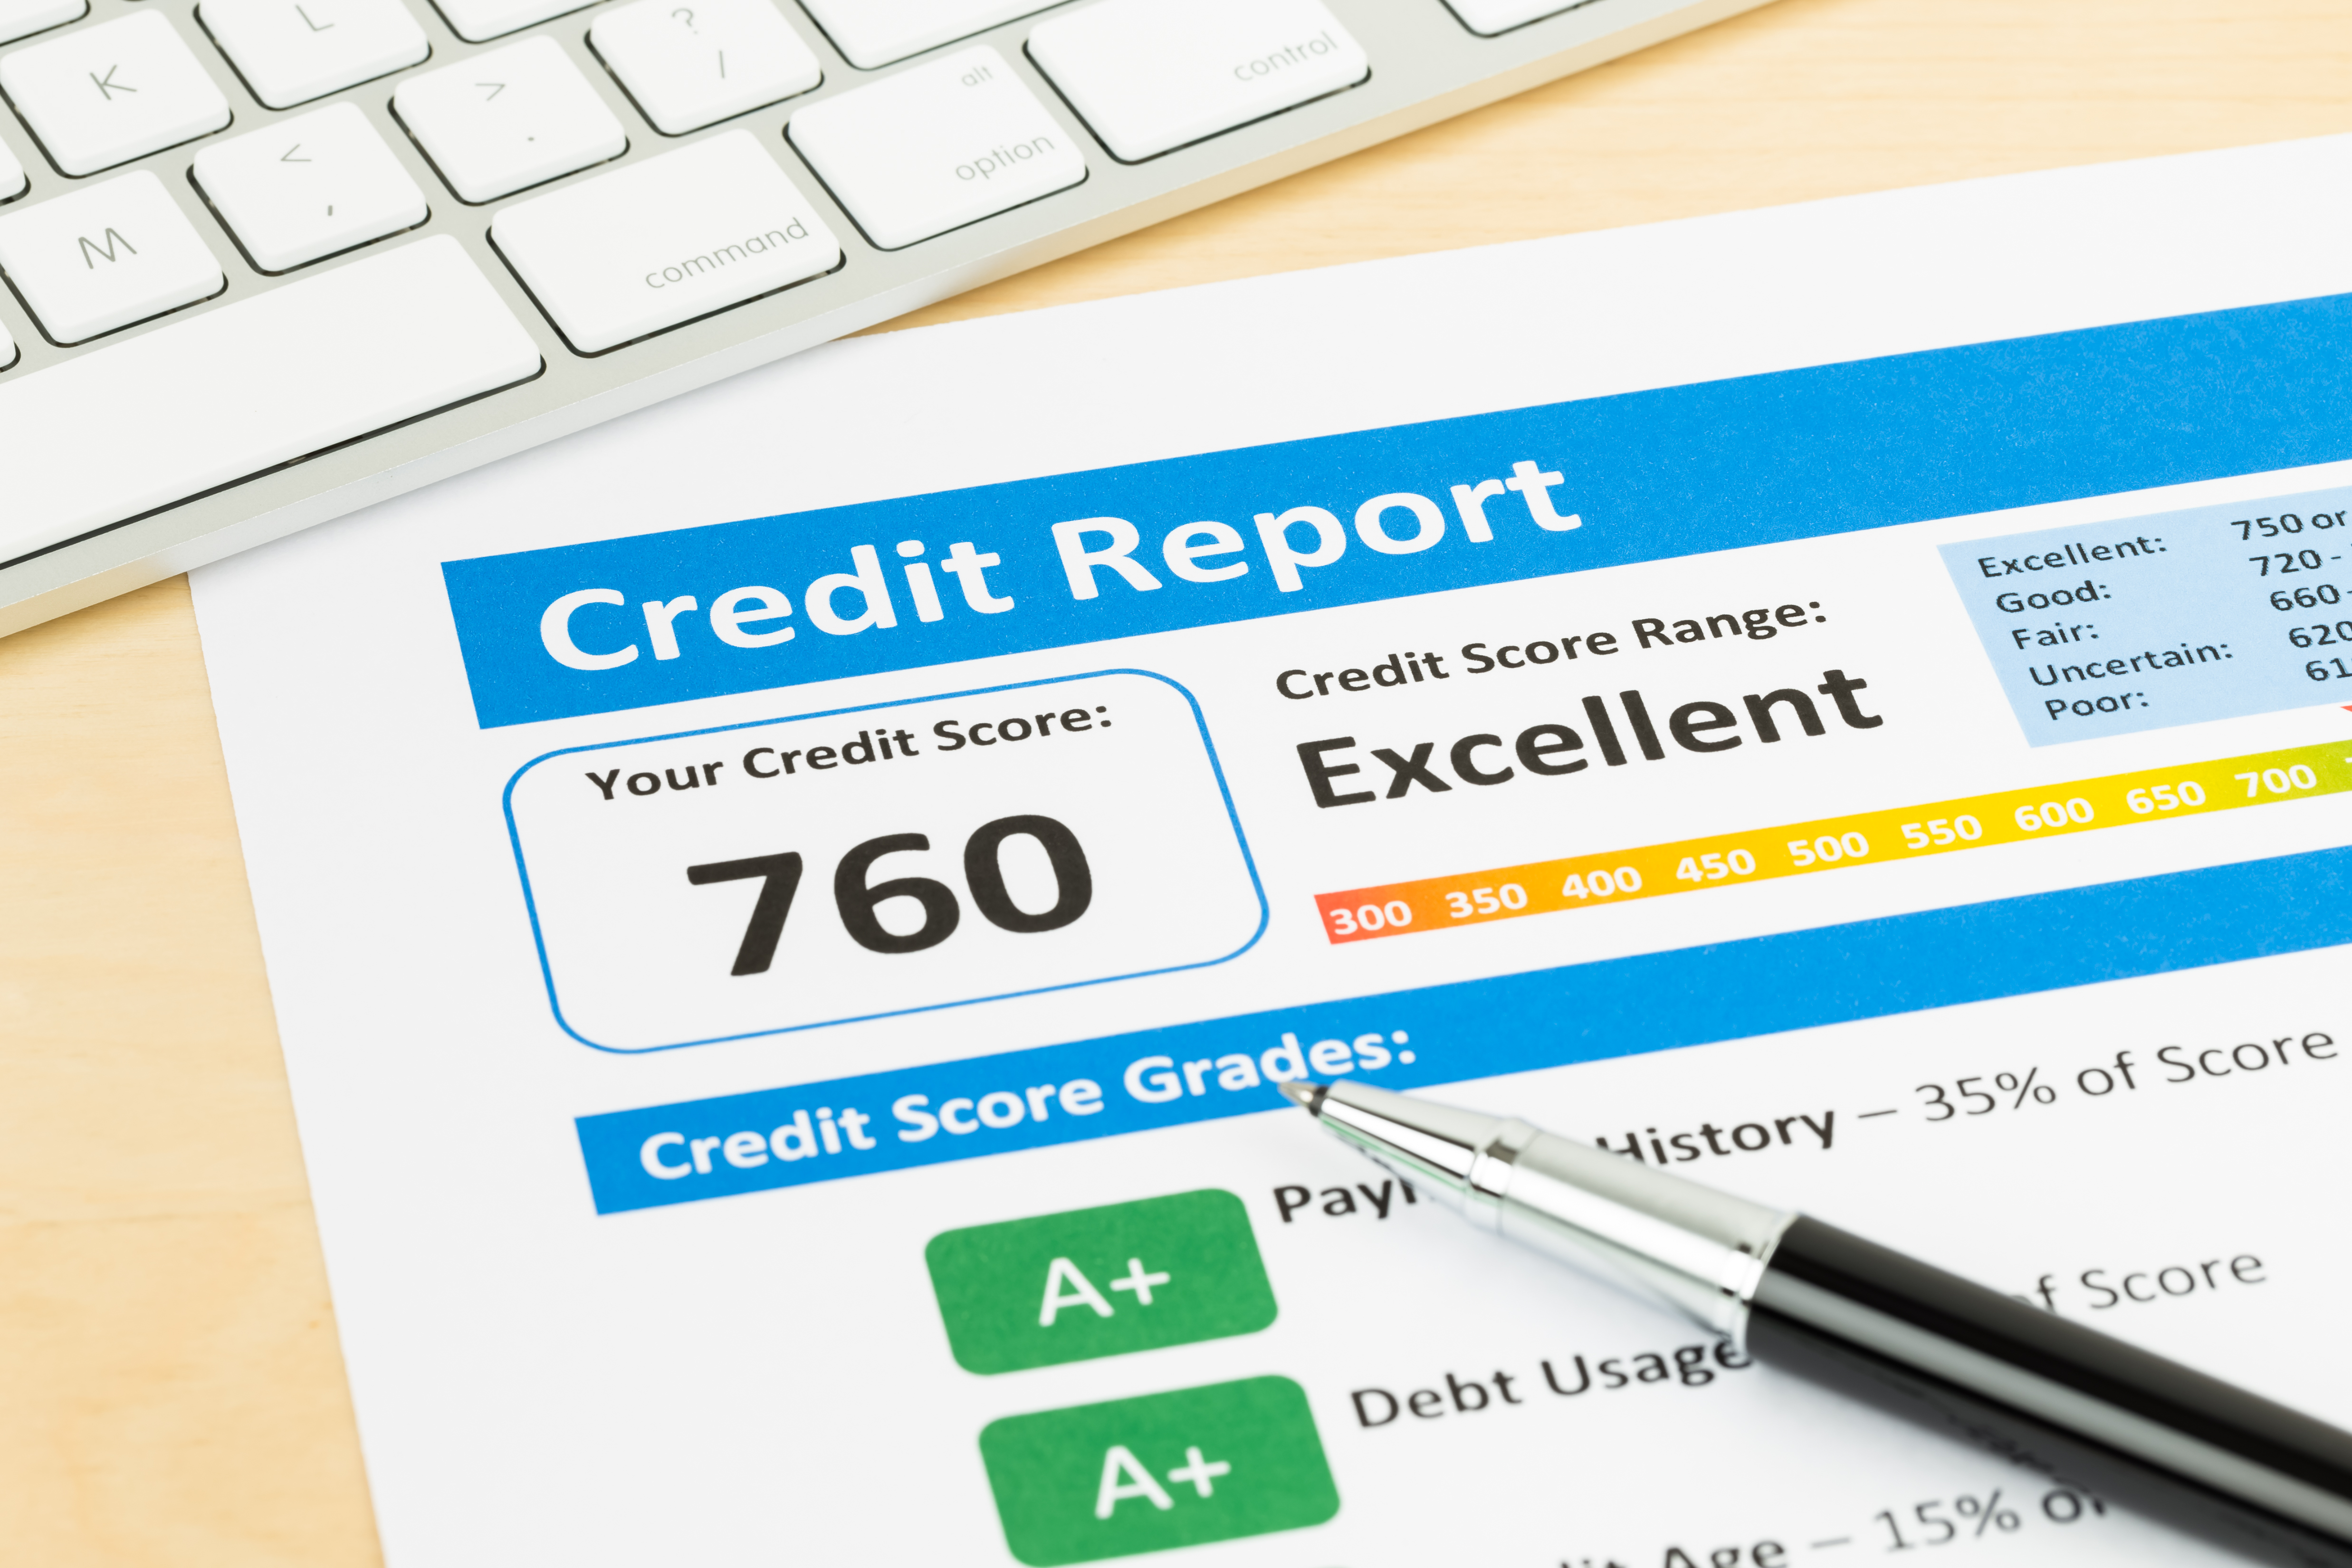 Difference between a credit report and a credit score